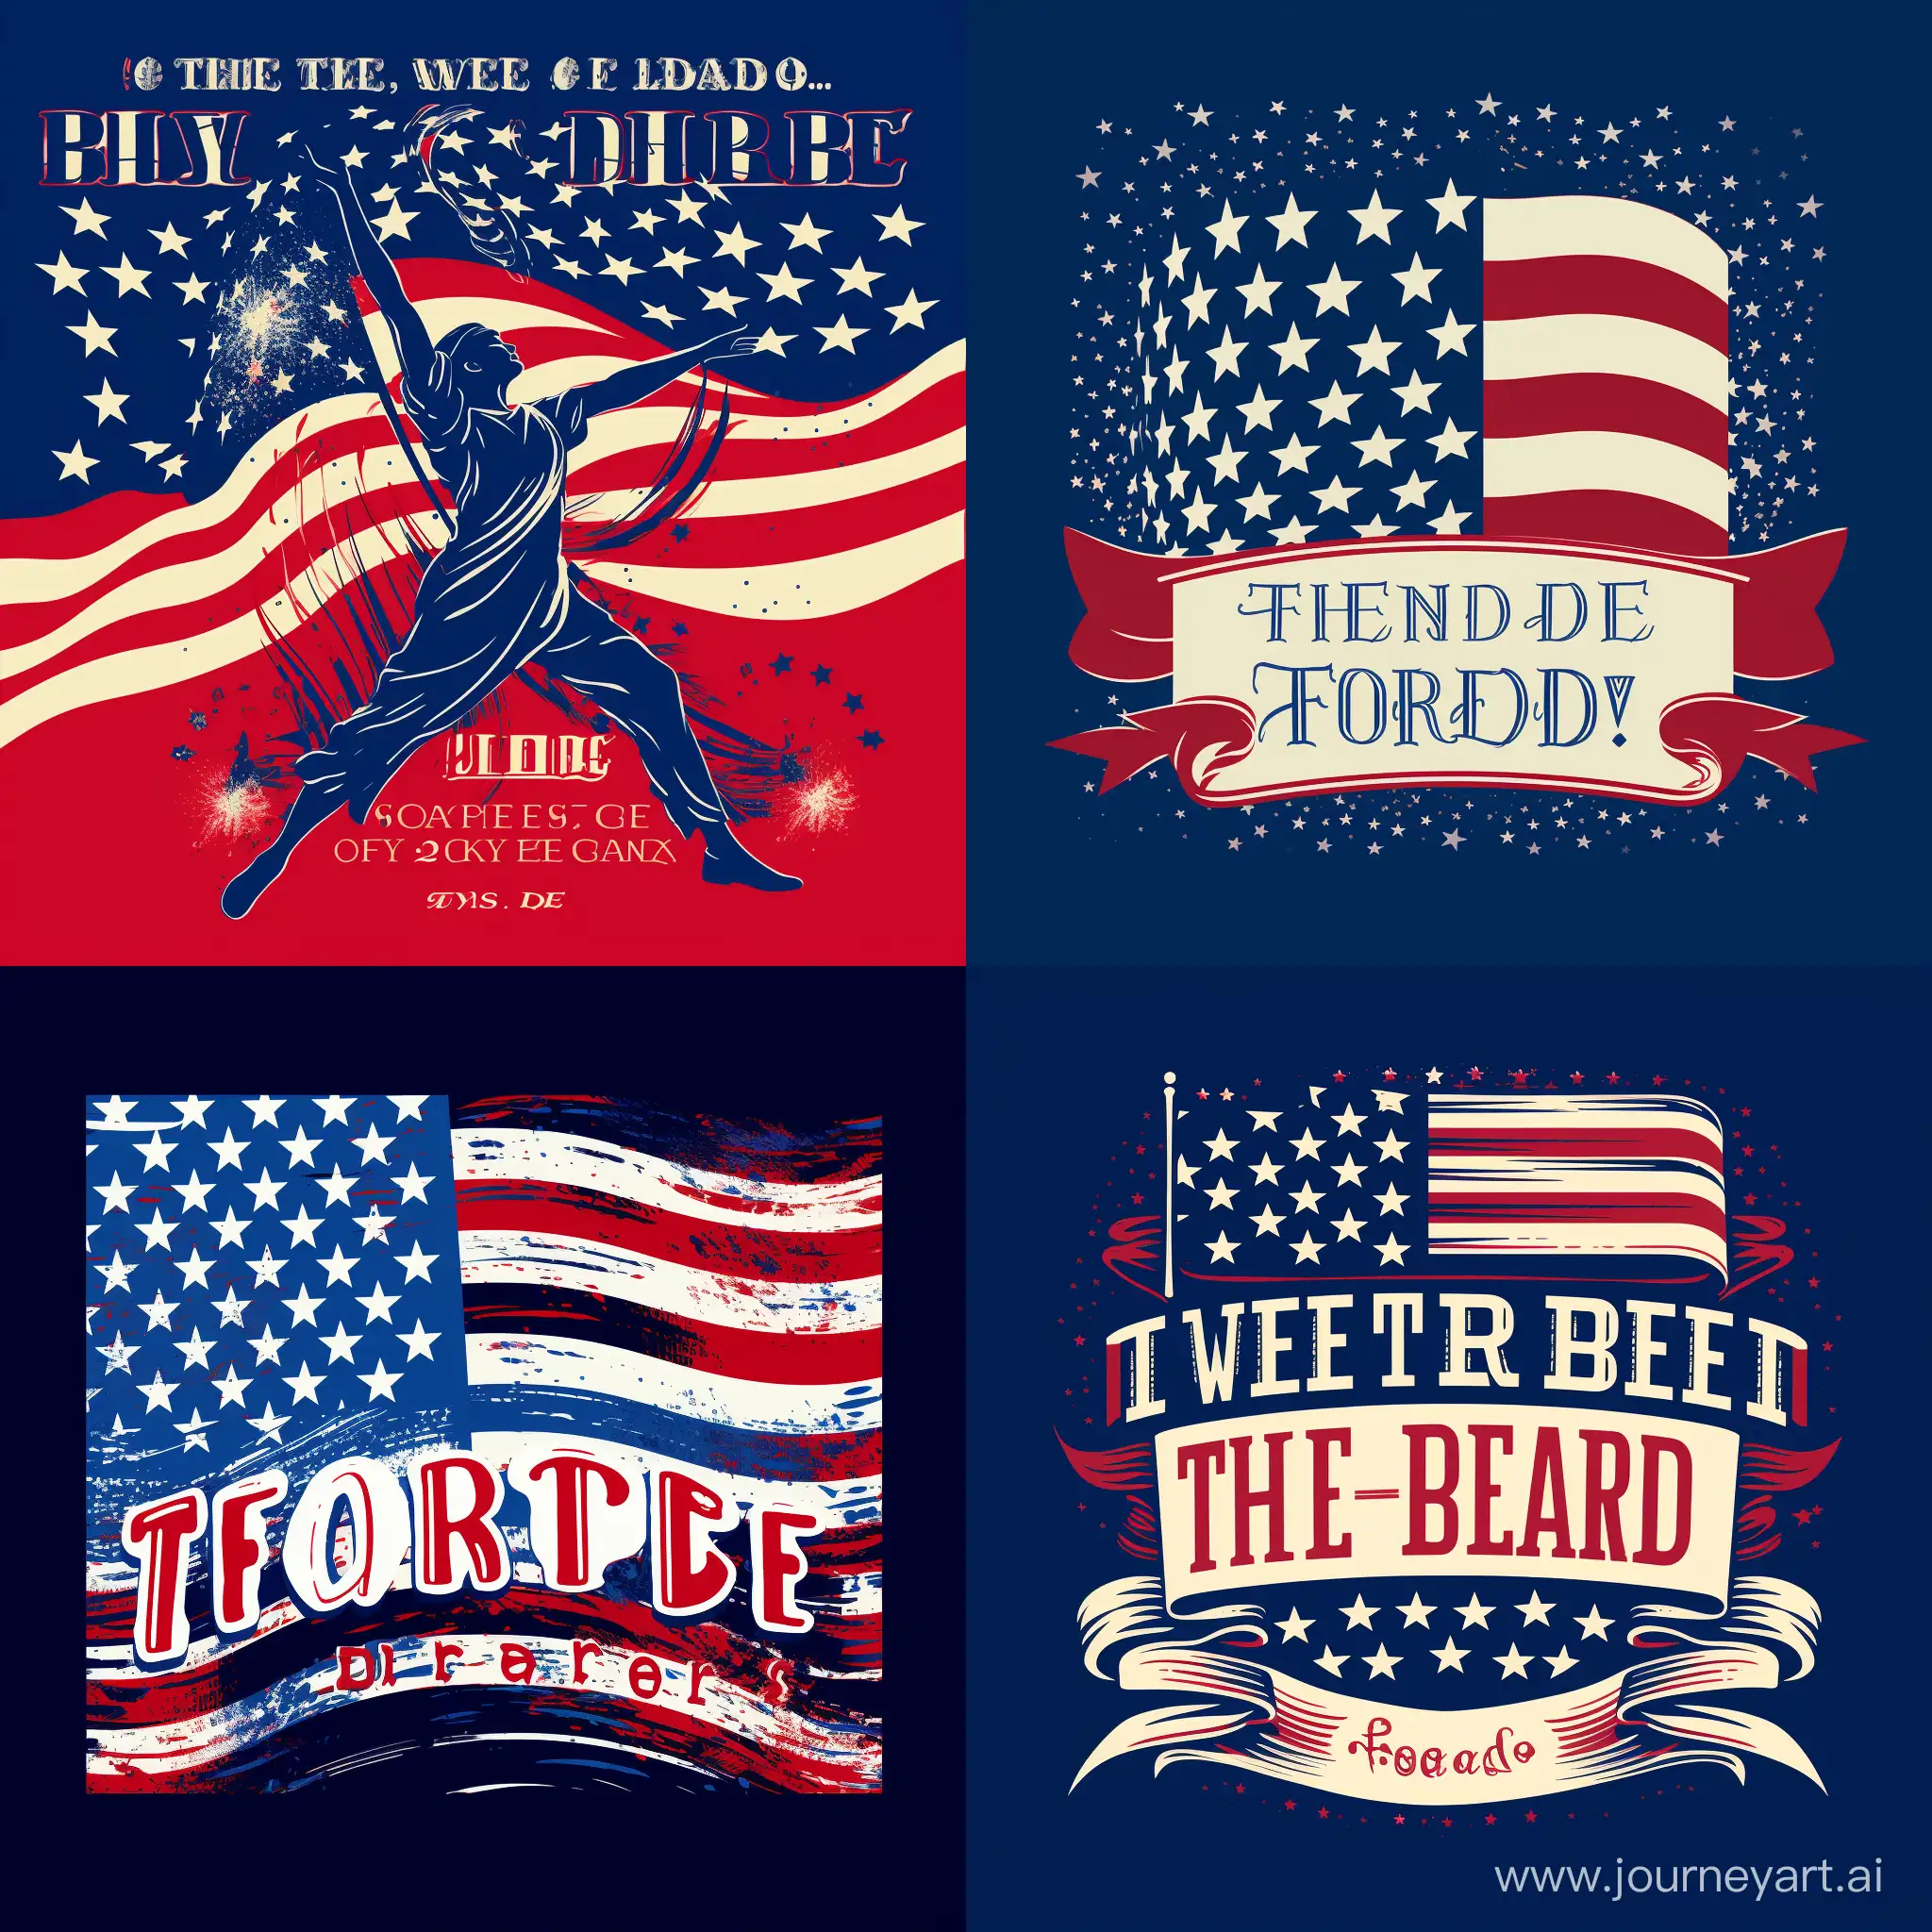 Action: Design a creative Artwork to ensures that the design is patriotic, respectful, and appealing, capturing the essence of American pride in a wearable form. 

Typography: Land of the Freebies, because of the Brave.

Color Scheme: Stick to the traditional colors of the American flag: red, white, and blue. 

Font: Select a font that is bold and legible, possibly with a traditional touch. Ensure the font complements the overall design without overpowering it. The text should be easily readable from a distance. Experiment with fonts and placements to ensure your message stands out. 

Additional Graphics: Subtly include other patriotic symbols like a silhouette of the Bald Eagle or a small Liberty Bell. Place these additional elements in a way that supports the main design. The text and imagery should work together harmoniously.

Humor and Puns: Use puns that are relevant to the theme of design. Ensure that the humor enhances the design and doesn't overshadow the overall aesthetic.

Placement: Pay attention to placement of Artwork in center and keep 10mm margin all around the design edge. Ensure the design is symmetrical and well-aligned accordingly.

Background: Pure white background. No mockup, no t-shirt.